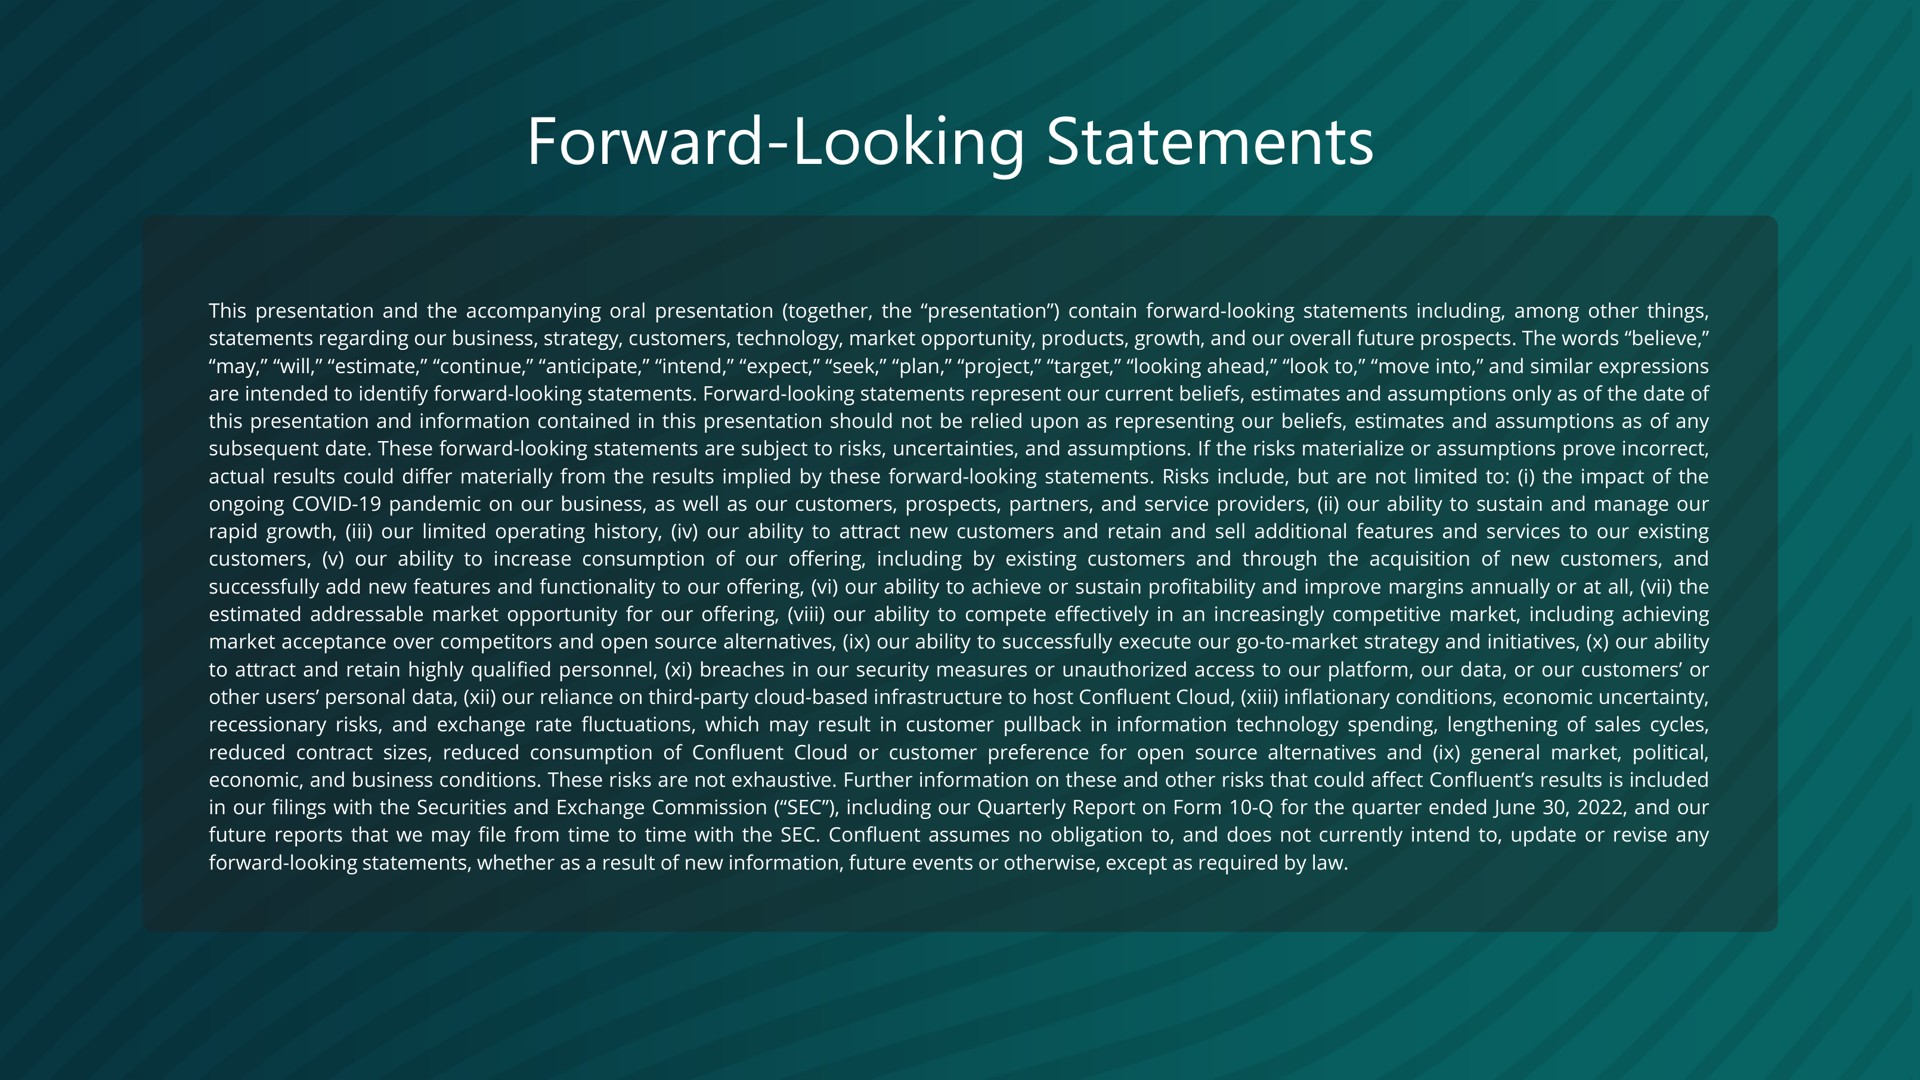 forward looking statements | Confluent